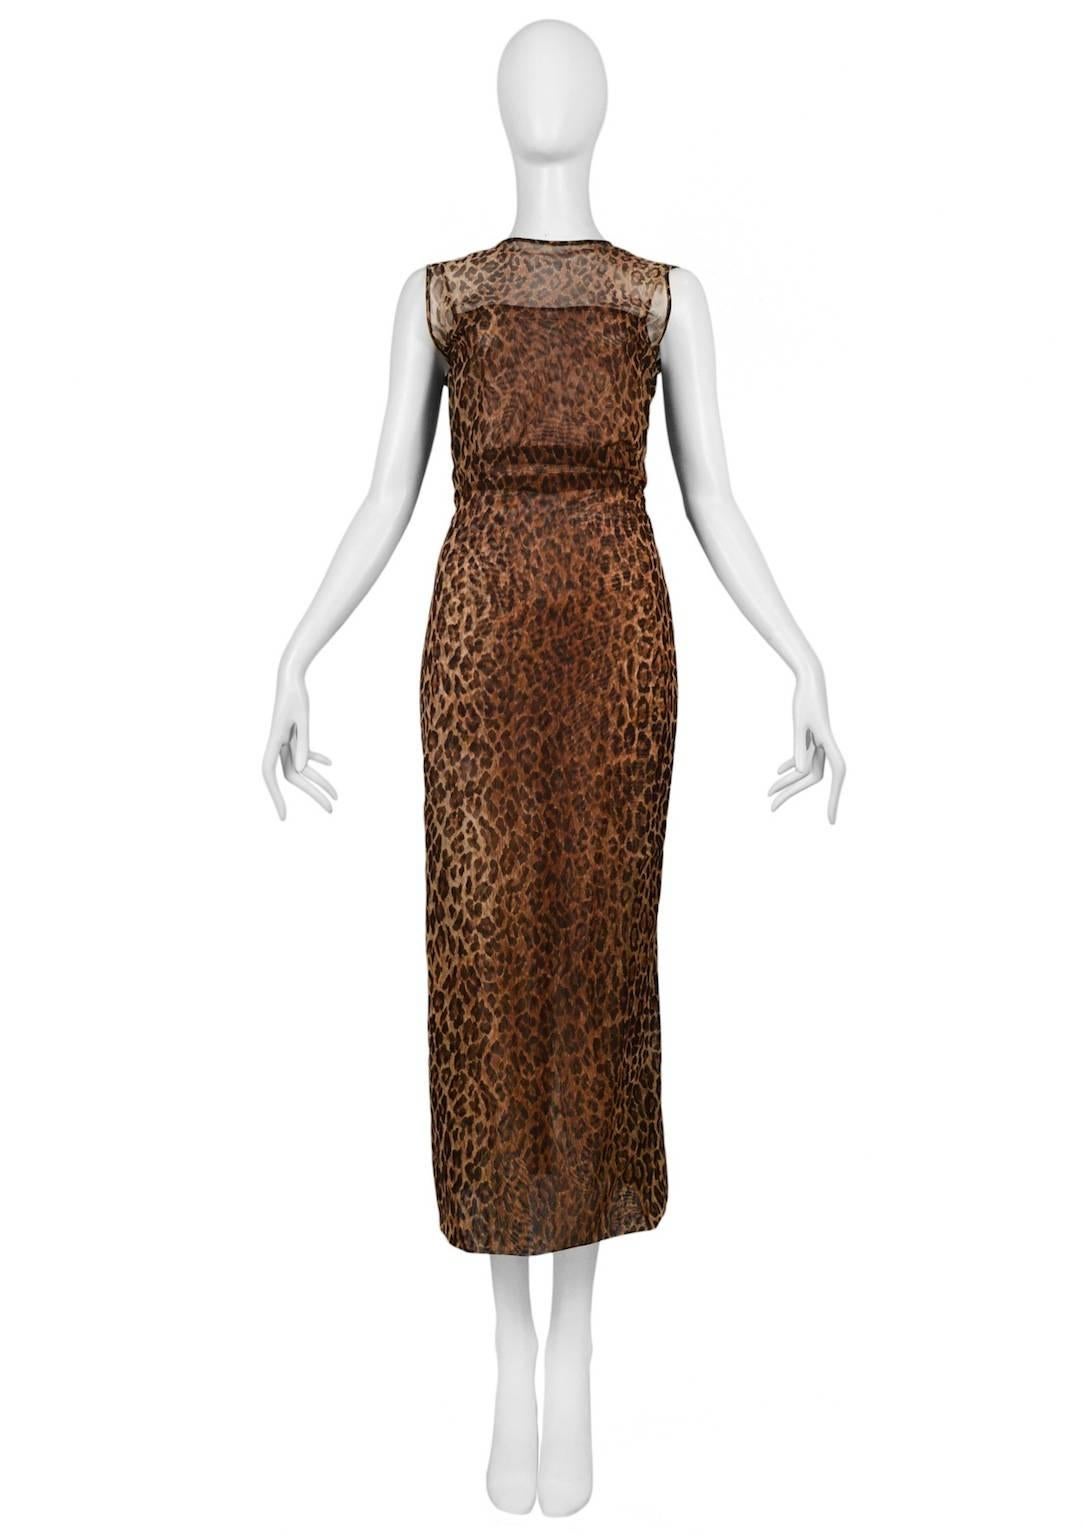 Vintage Dolce & Gabbana sheer leopard sleeveless dress featuring a matching attached underlining. From the Spring / Summer 1997 Collection.